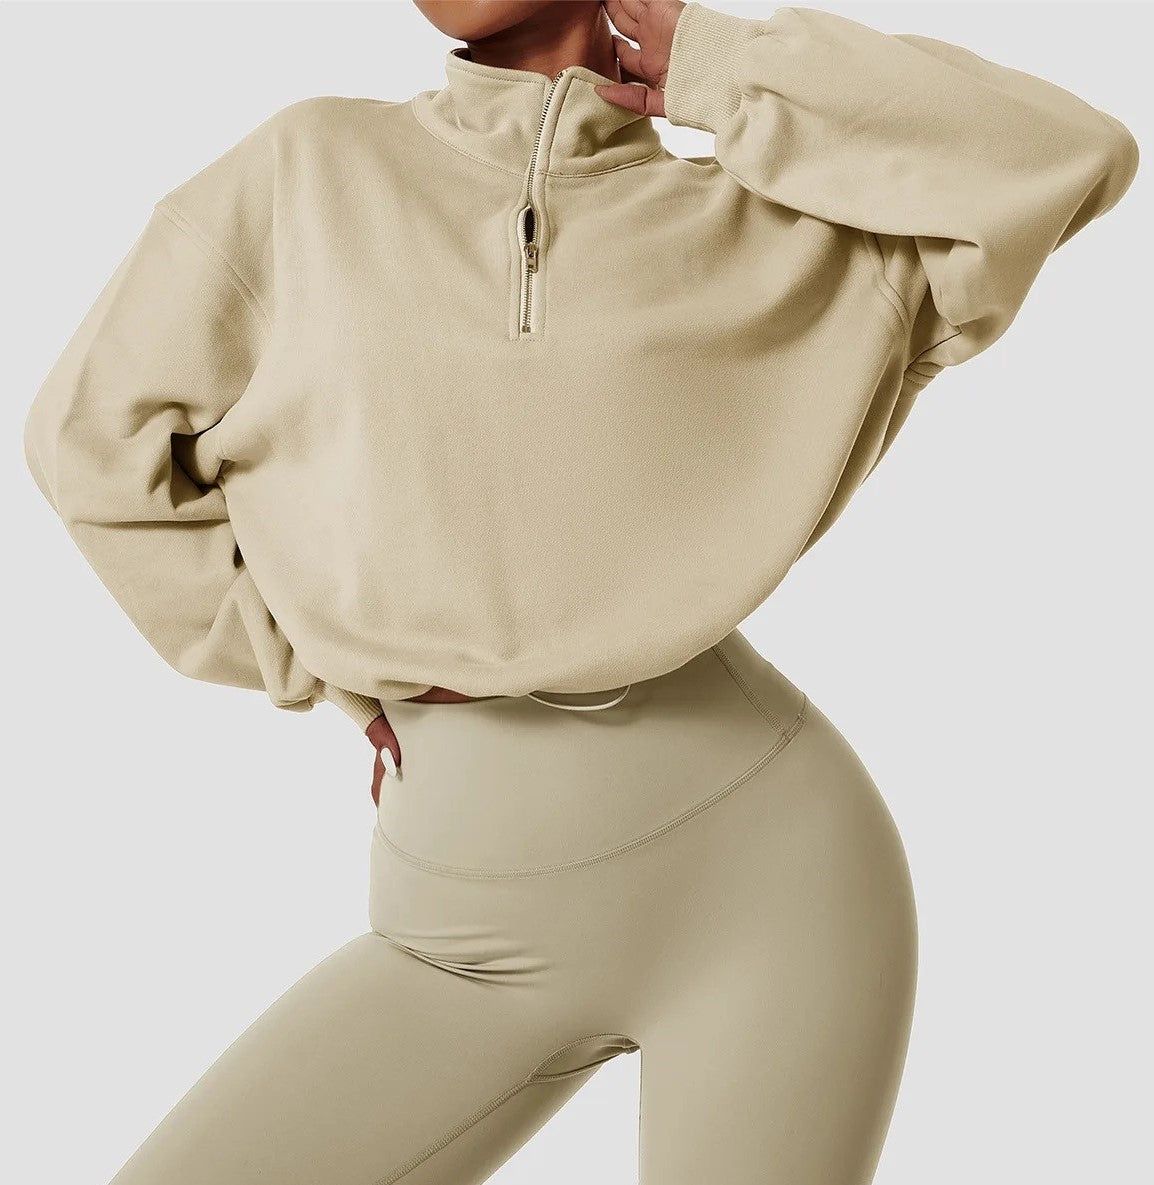 GymBabe Three Piece Set in Beige (Made with recycled material)